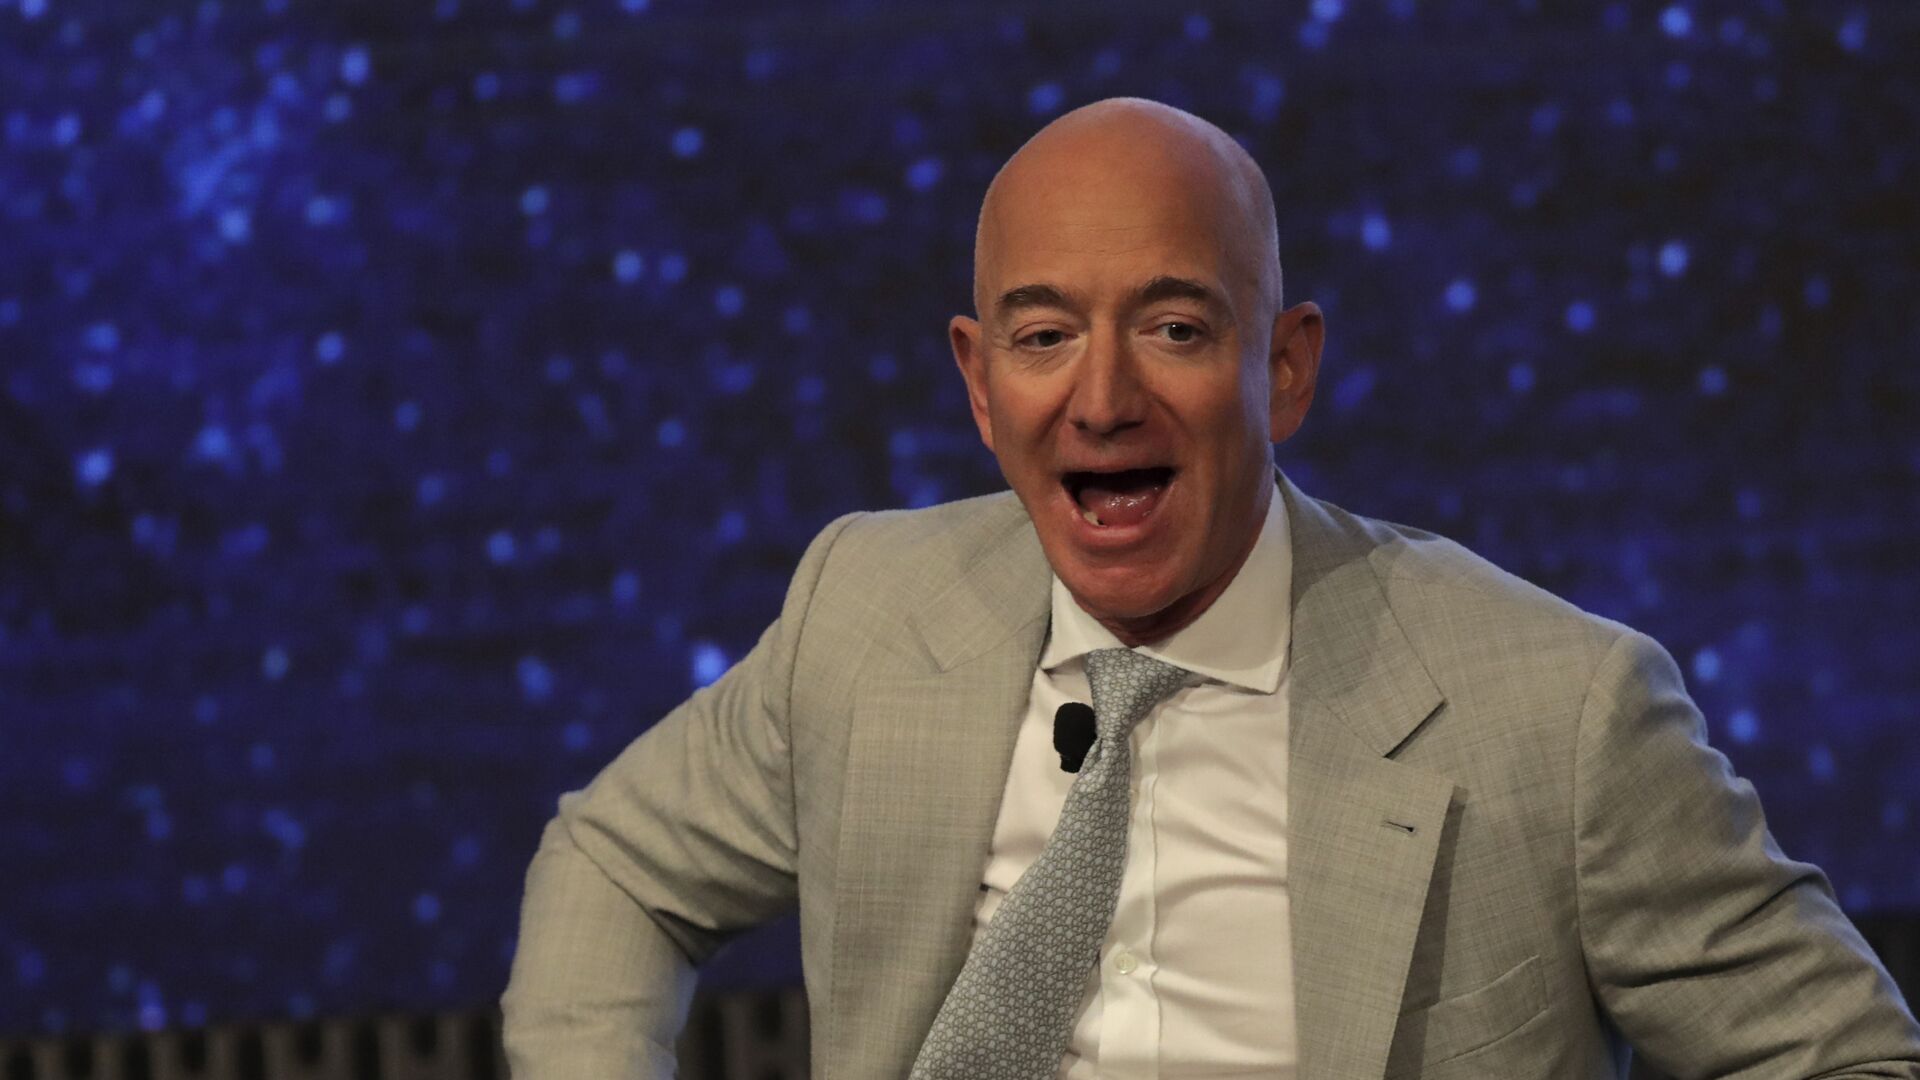 Amazon founder Jeff Bezos during the JFK Space Summit at the John F. Kennedy Presidential Library in Boston, Wednesday, June 19, 2019 - Sputnik International, 1920, 11.02.2022